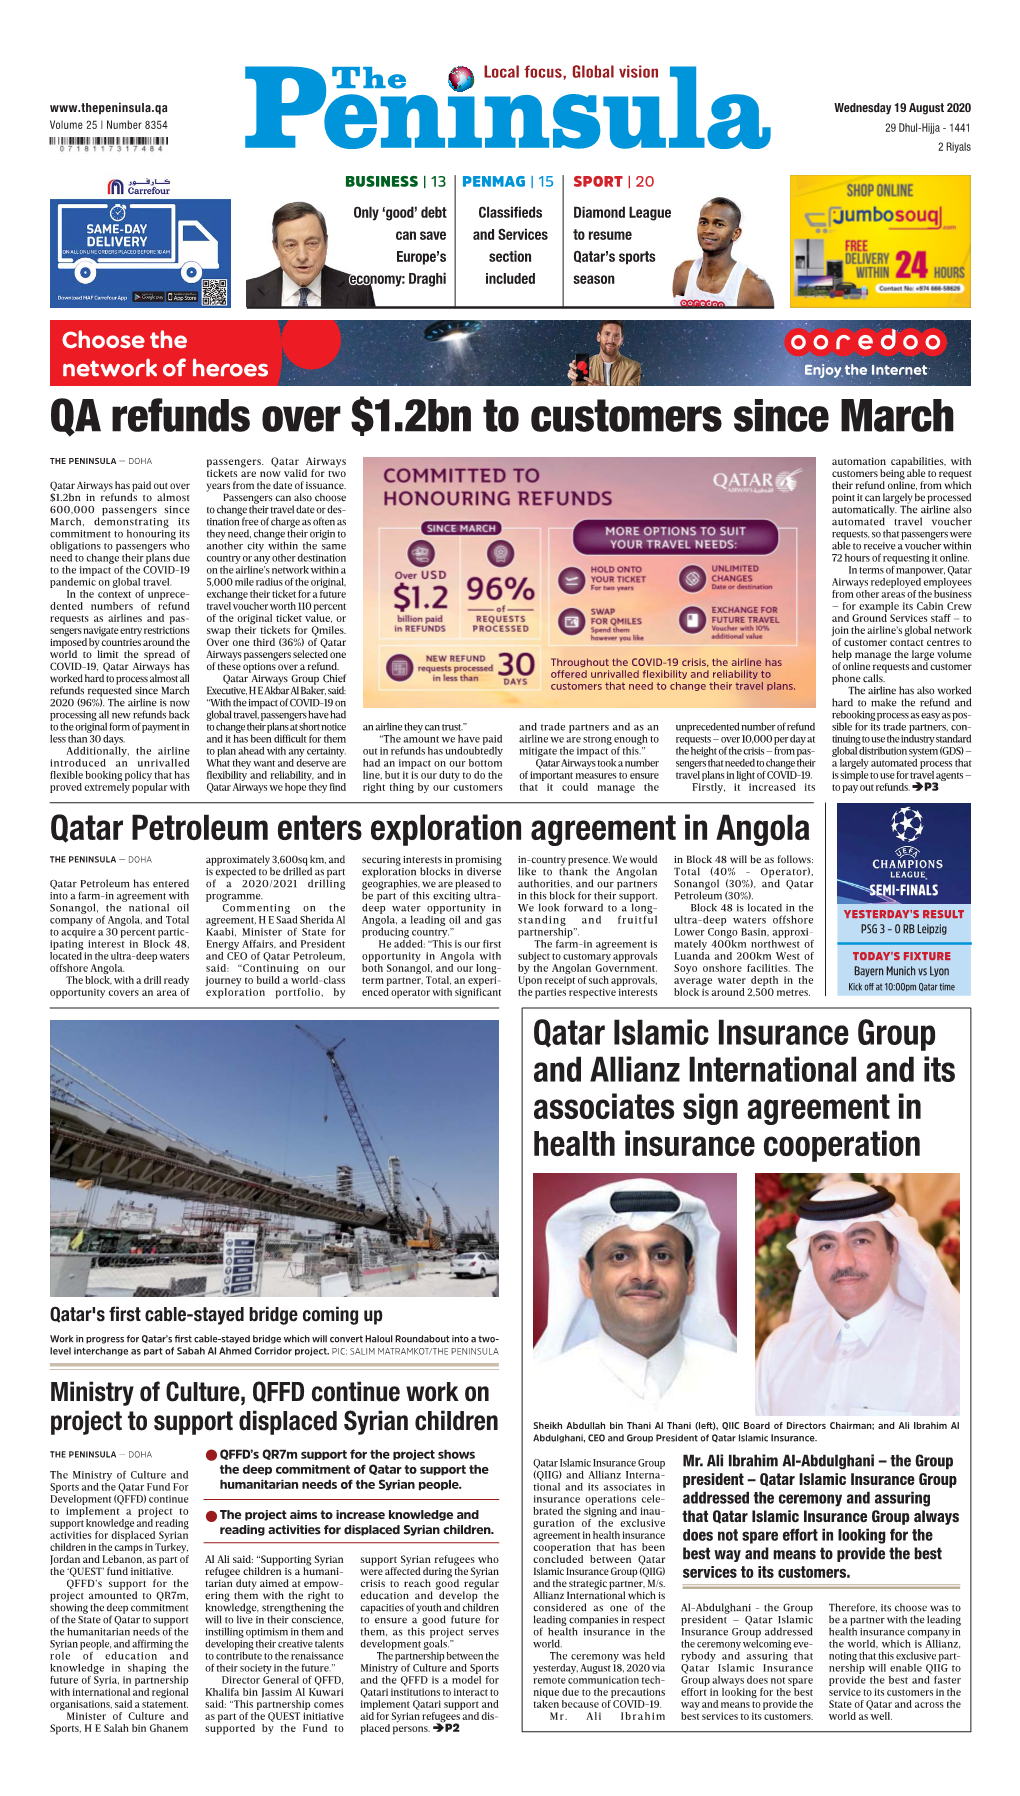 QA Refunds Over $1.2Bn to Customers Since March